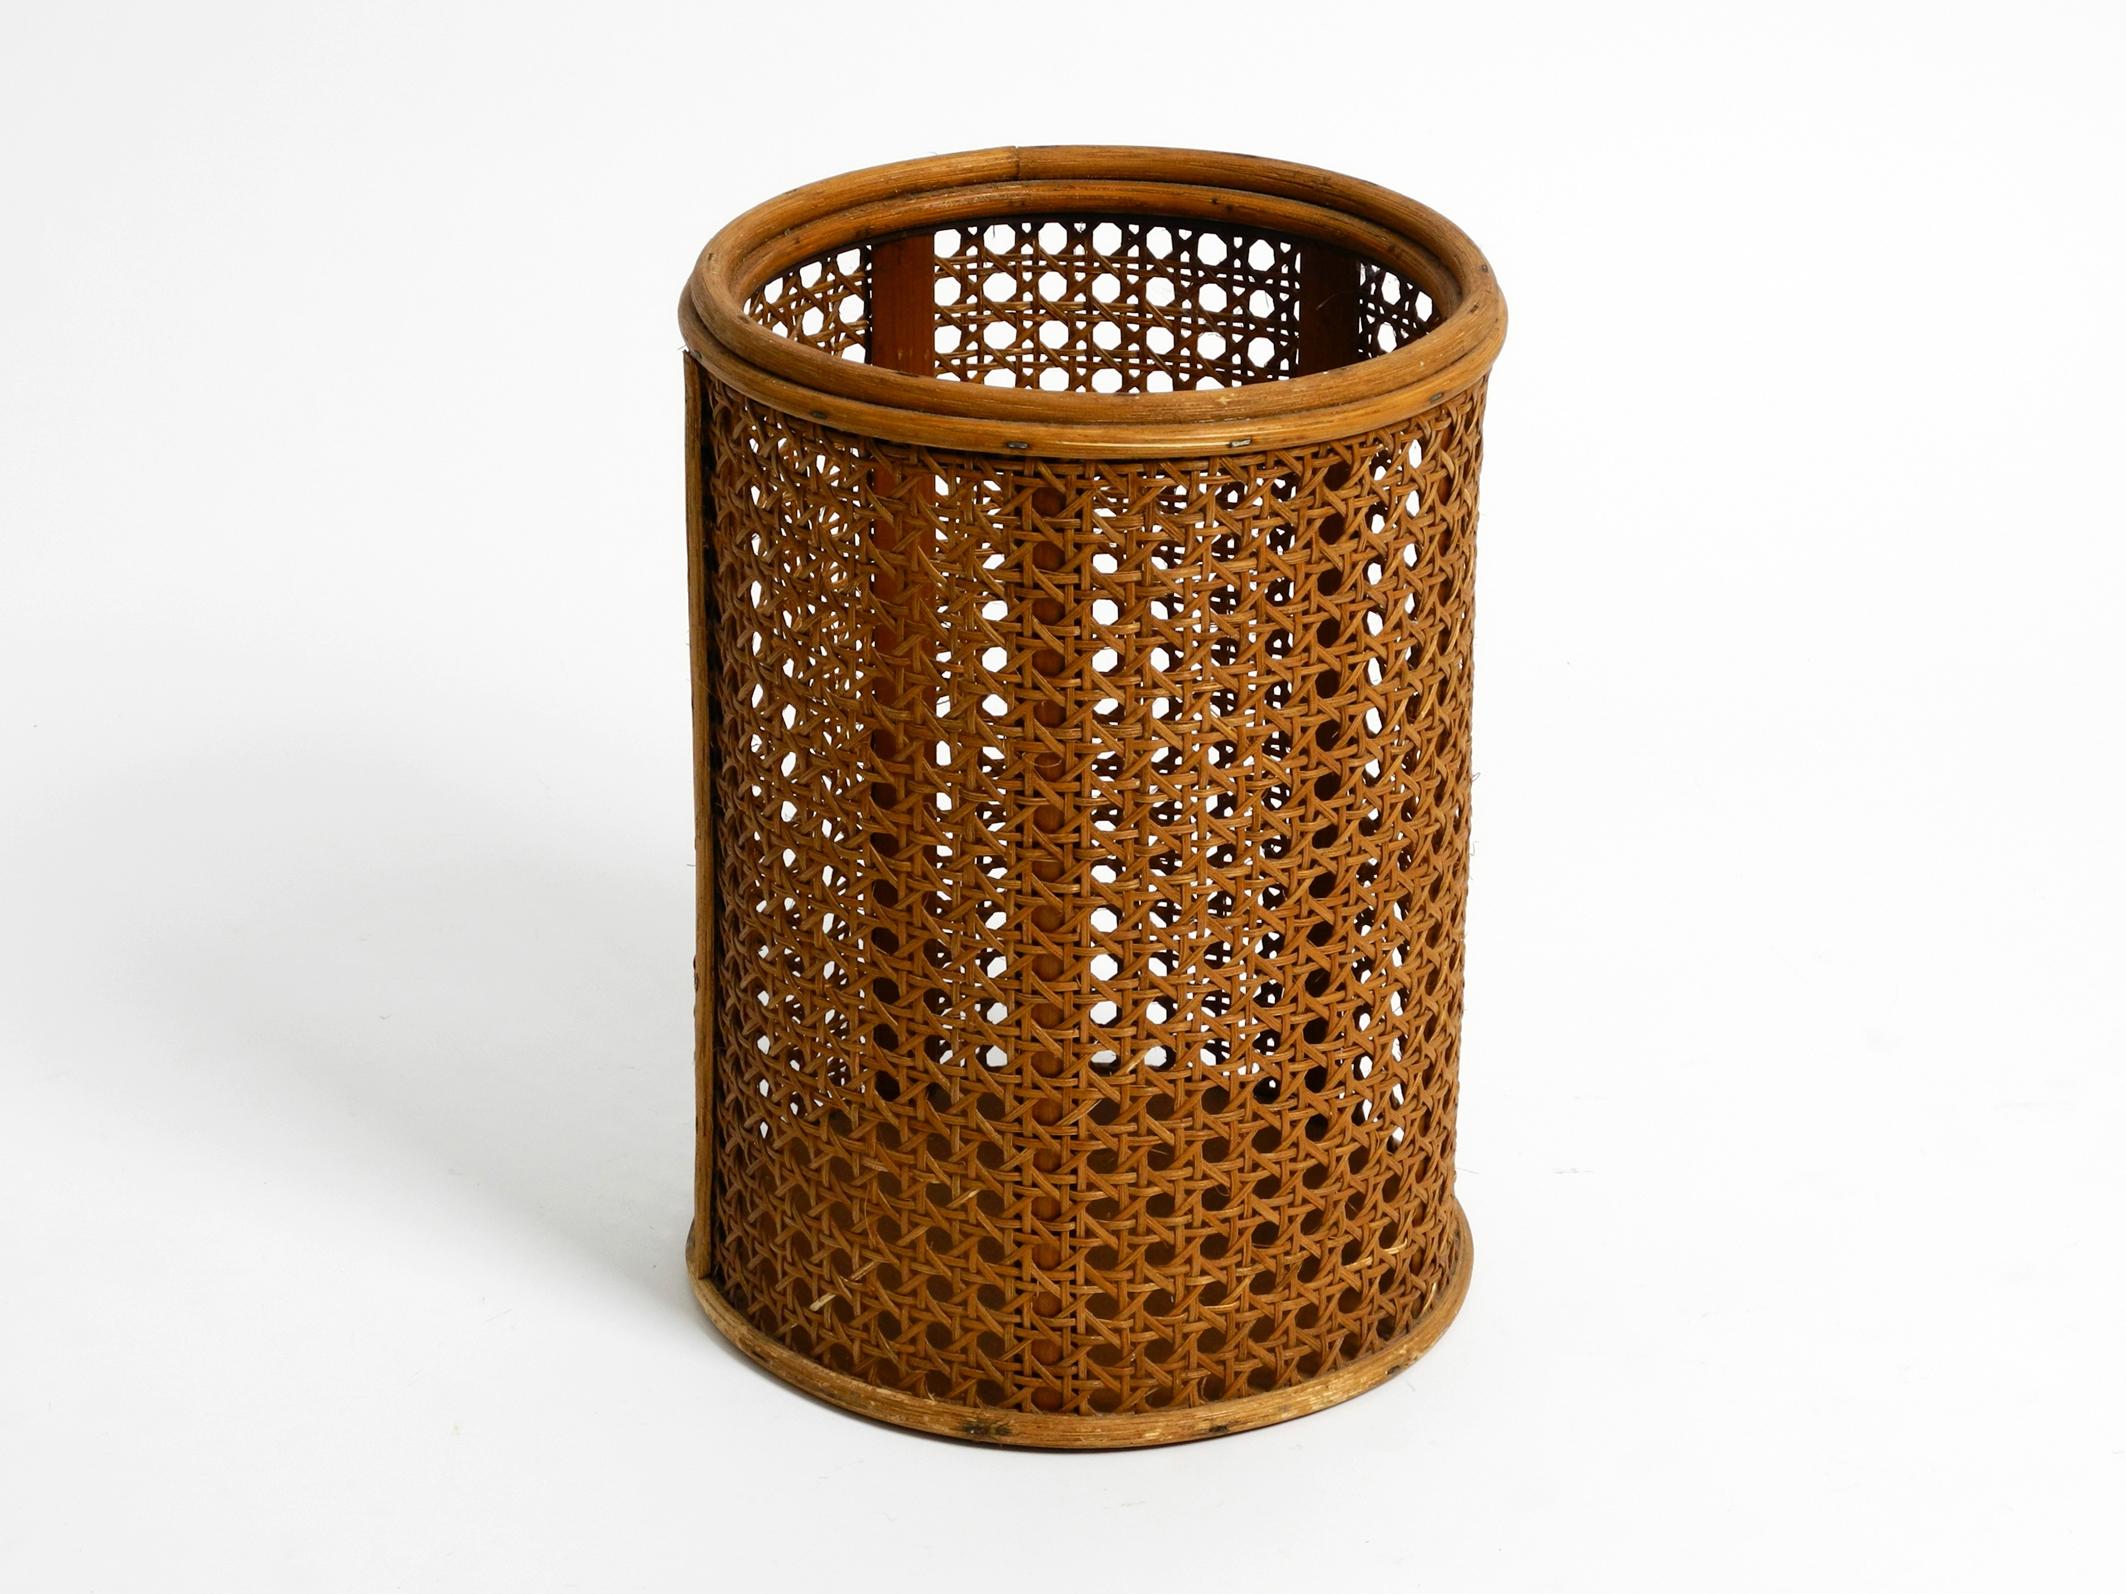 Small beautiful paper bin basket from the 1950s.
Bamboo frame, covered with original Viennese wickerwork.
Great design of the golden 50s.
Barely traces of usage. Very good vintage condition.
No damages to the wood or mesh.
100% original condition.